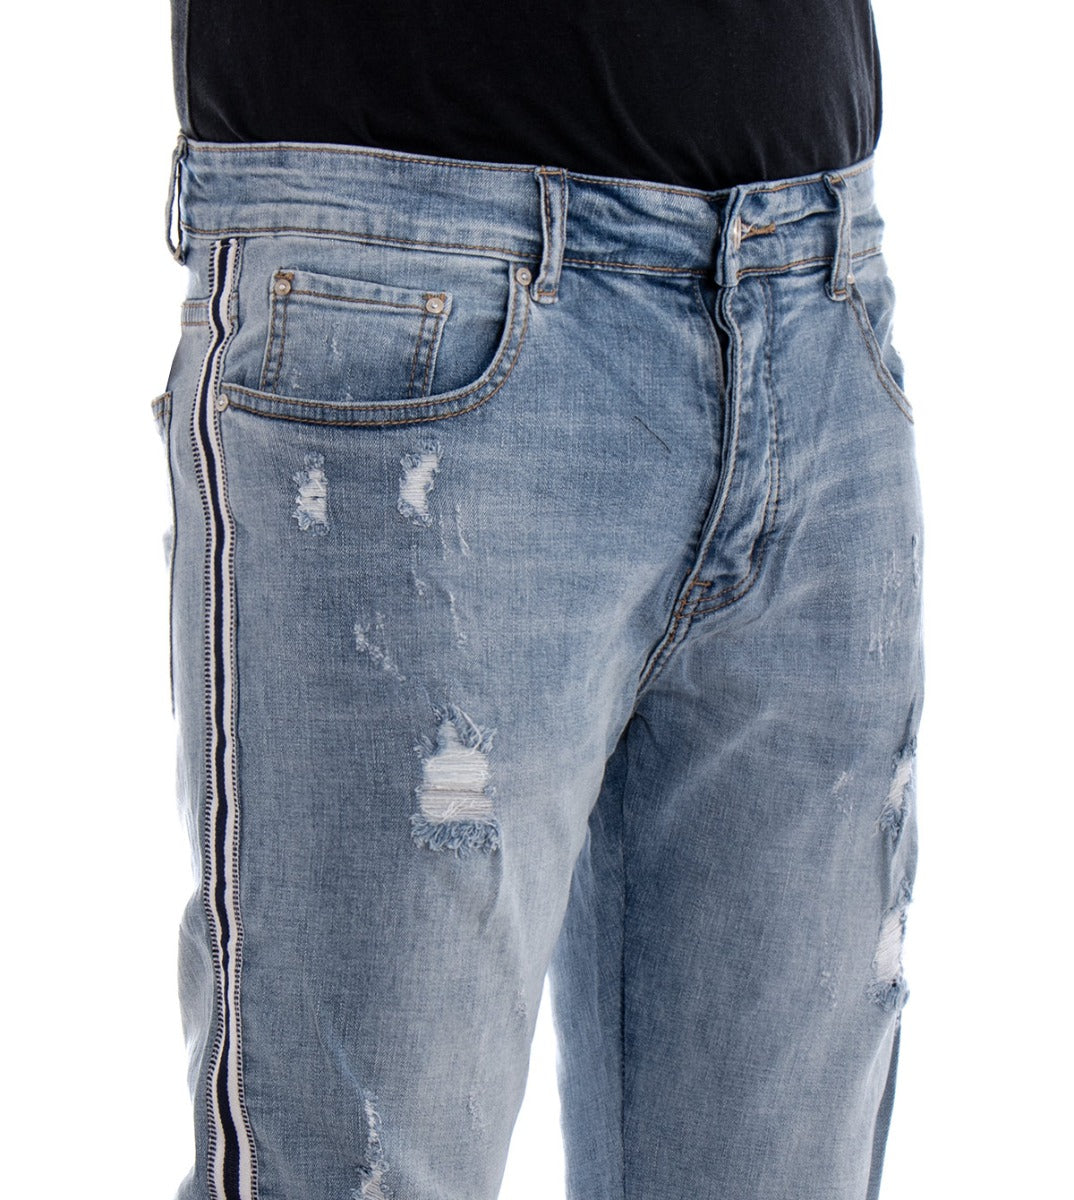 Pantaloni Jeans Uomo Slim Fit Stone Washed Cinque Tasche Rotture GIOSAL-P2258A